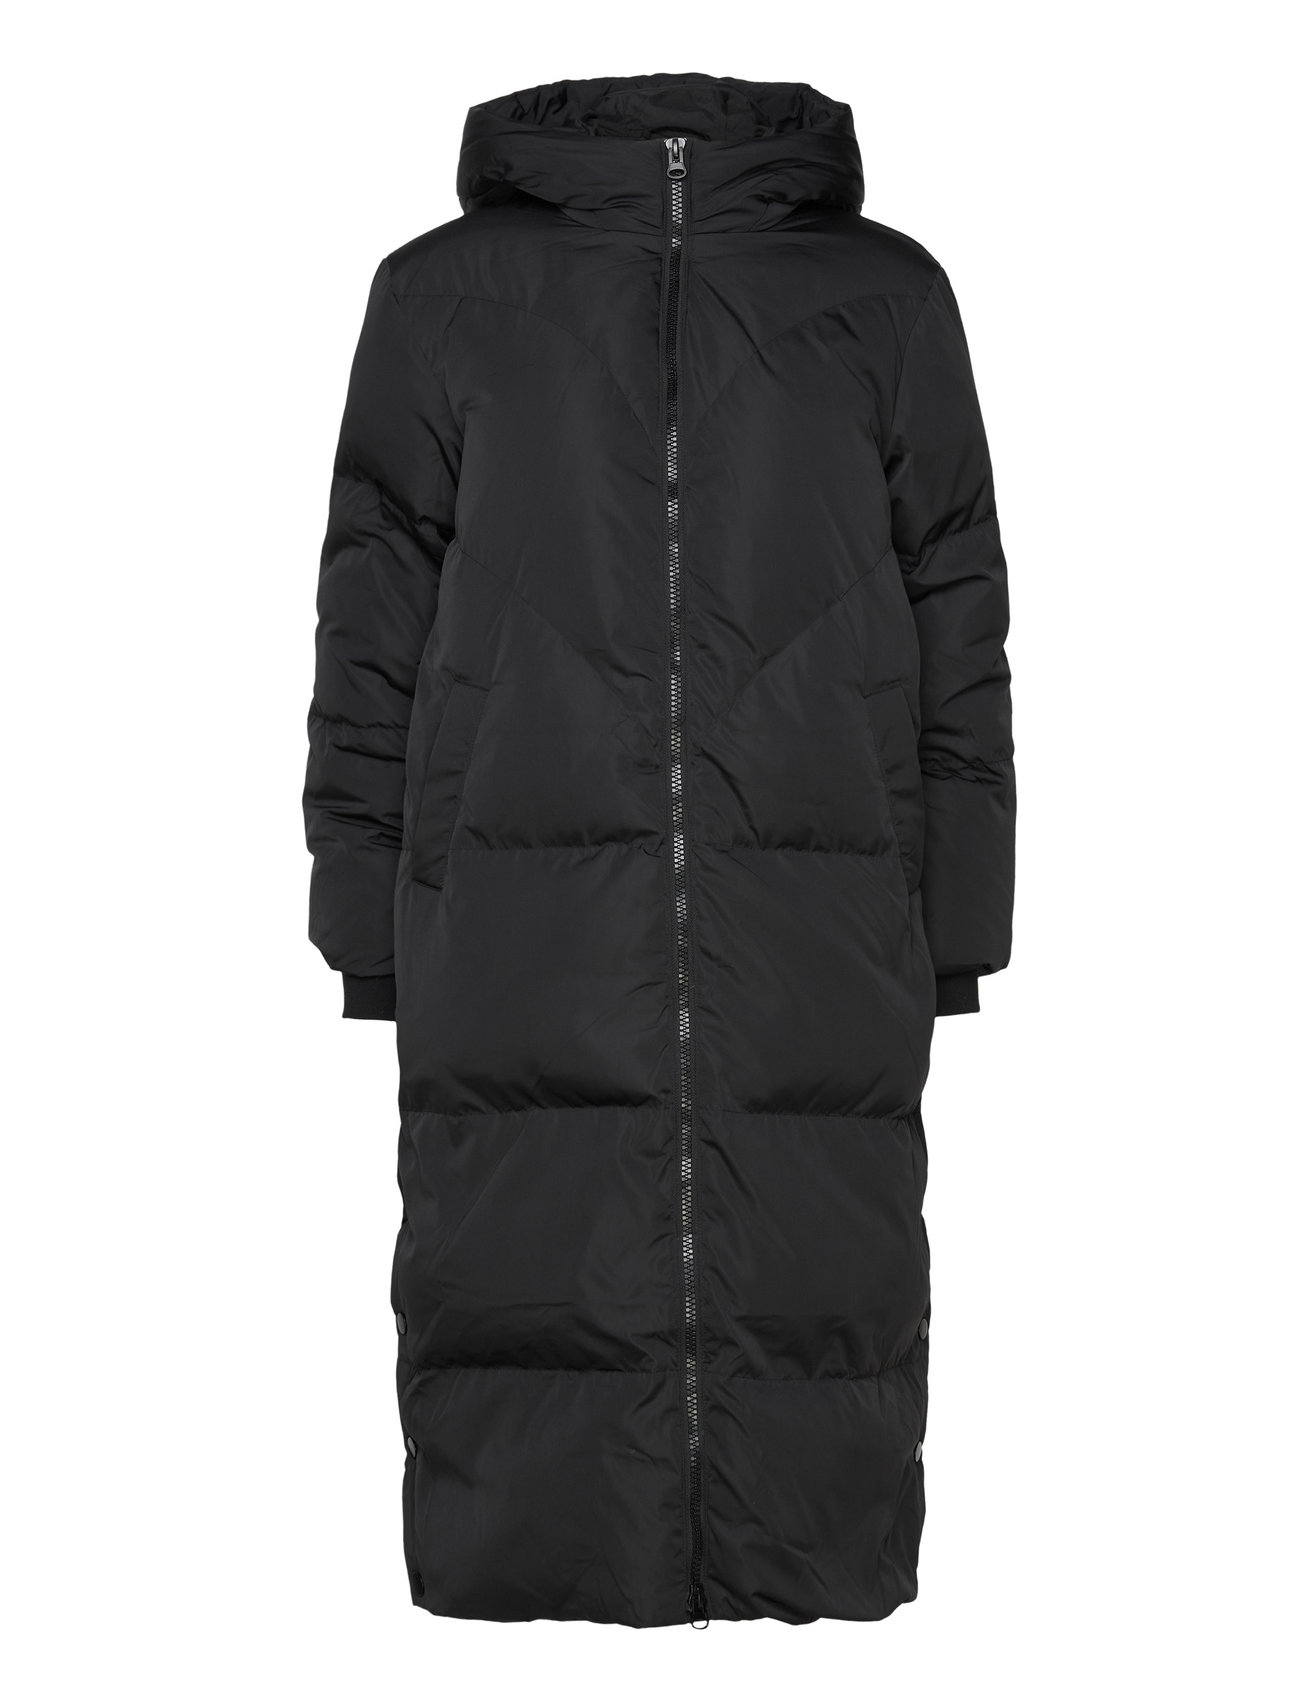 YAS online - returns 85.00 Padded Coats Boozt.com. Fast from S. and delivery YAS Yasirima Long Buy Ls at easy Coat €. Noos Down